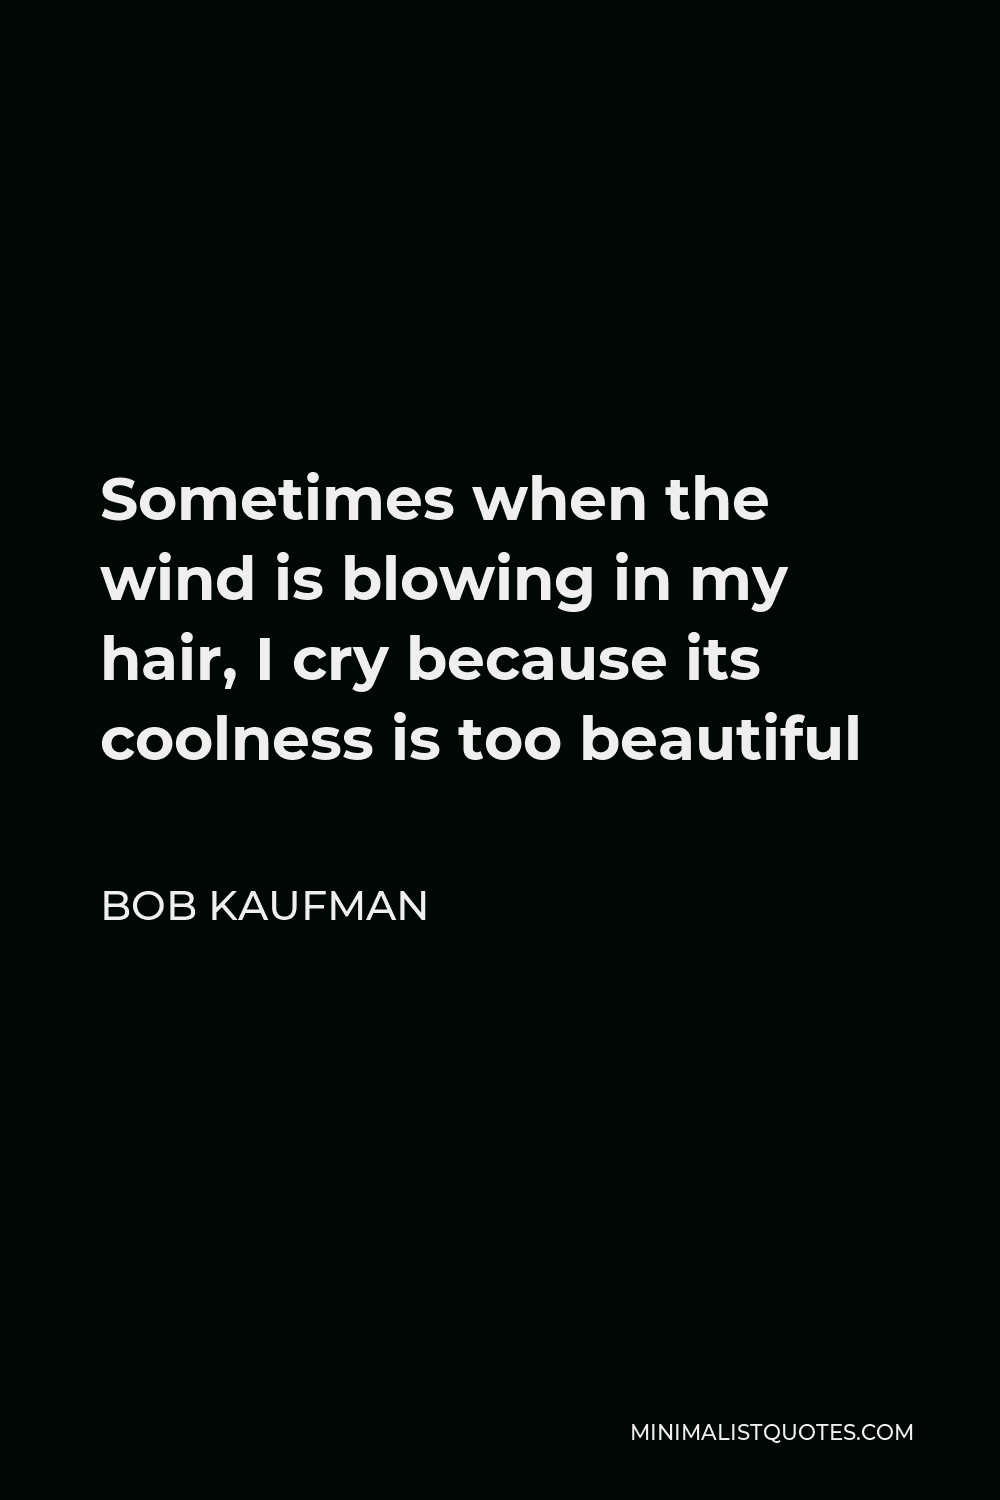 Bob Kaufman Quote: Sometimes when the wind is blowing in my hair, I cry  because its coolness is too beautiful